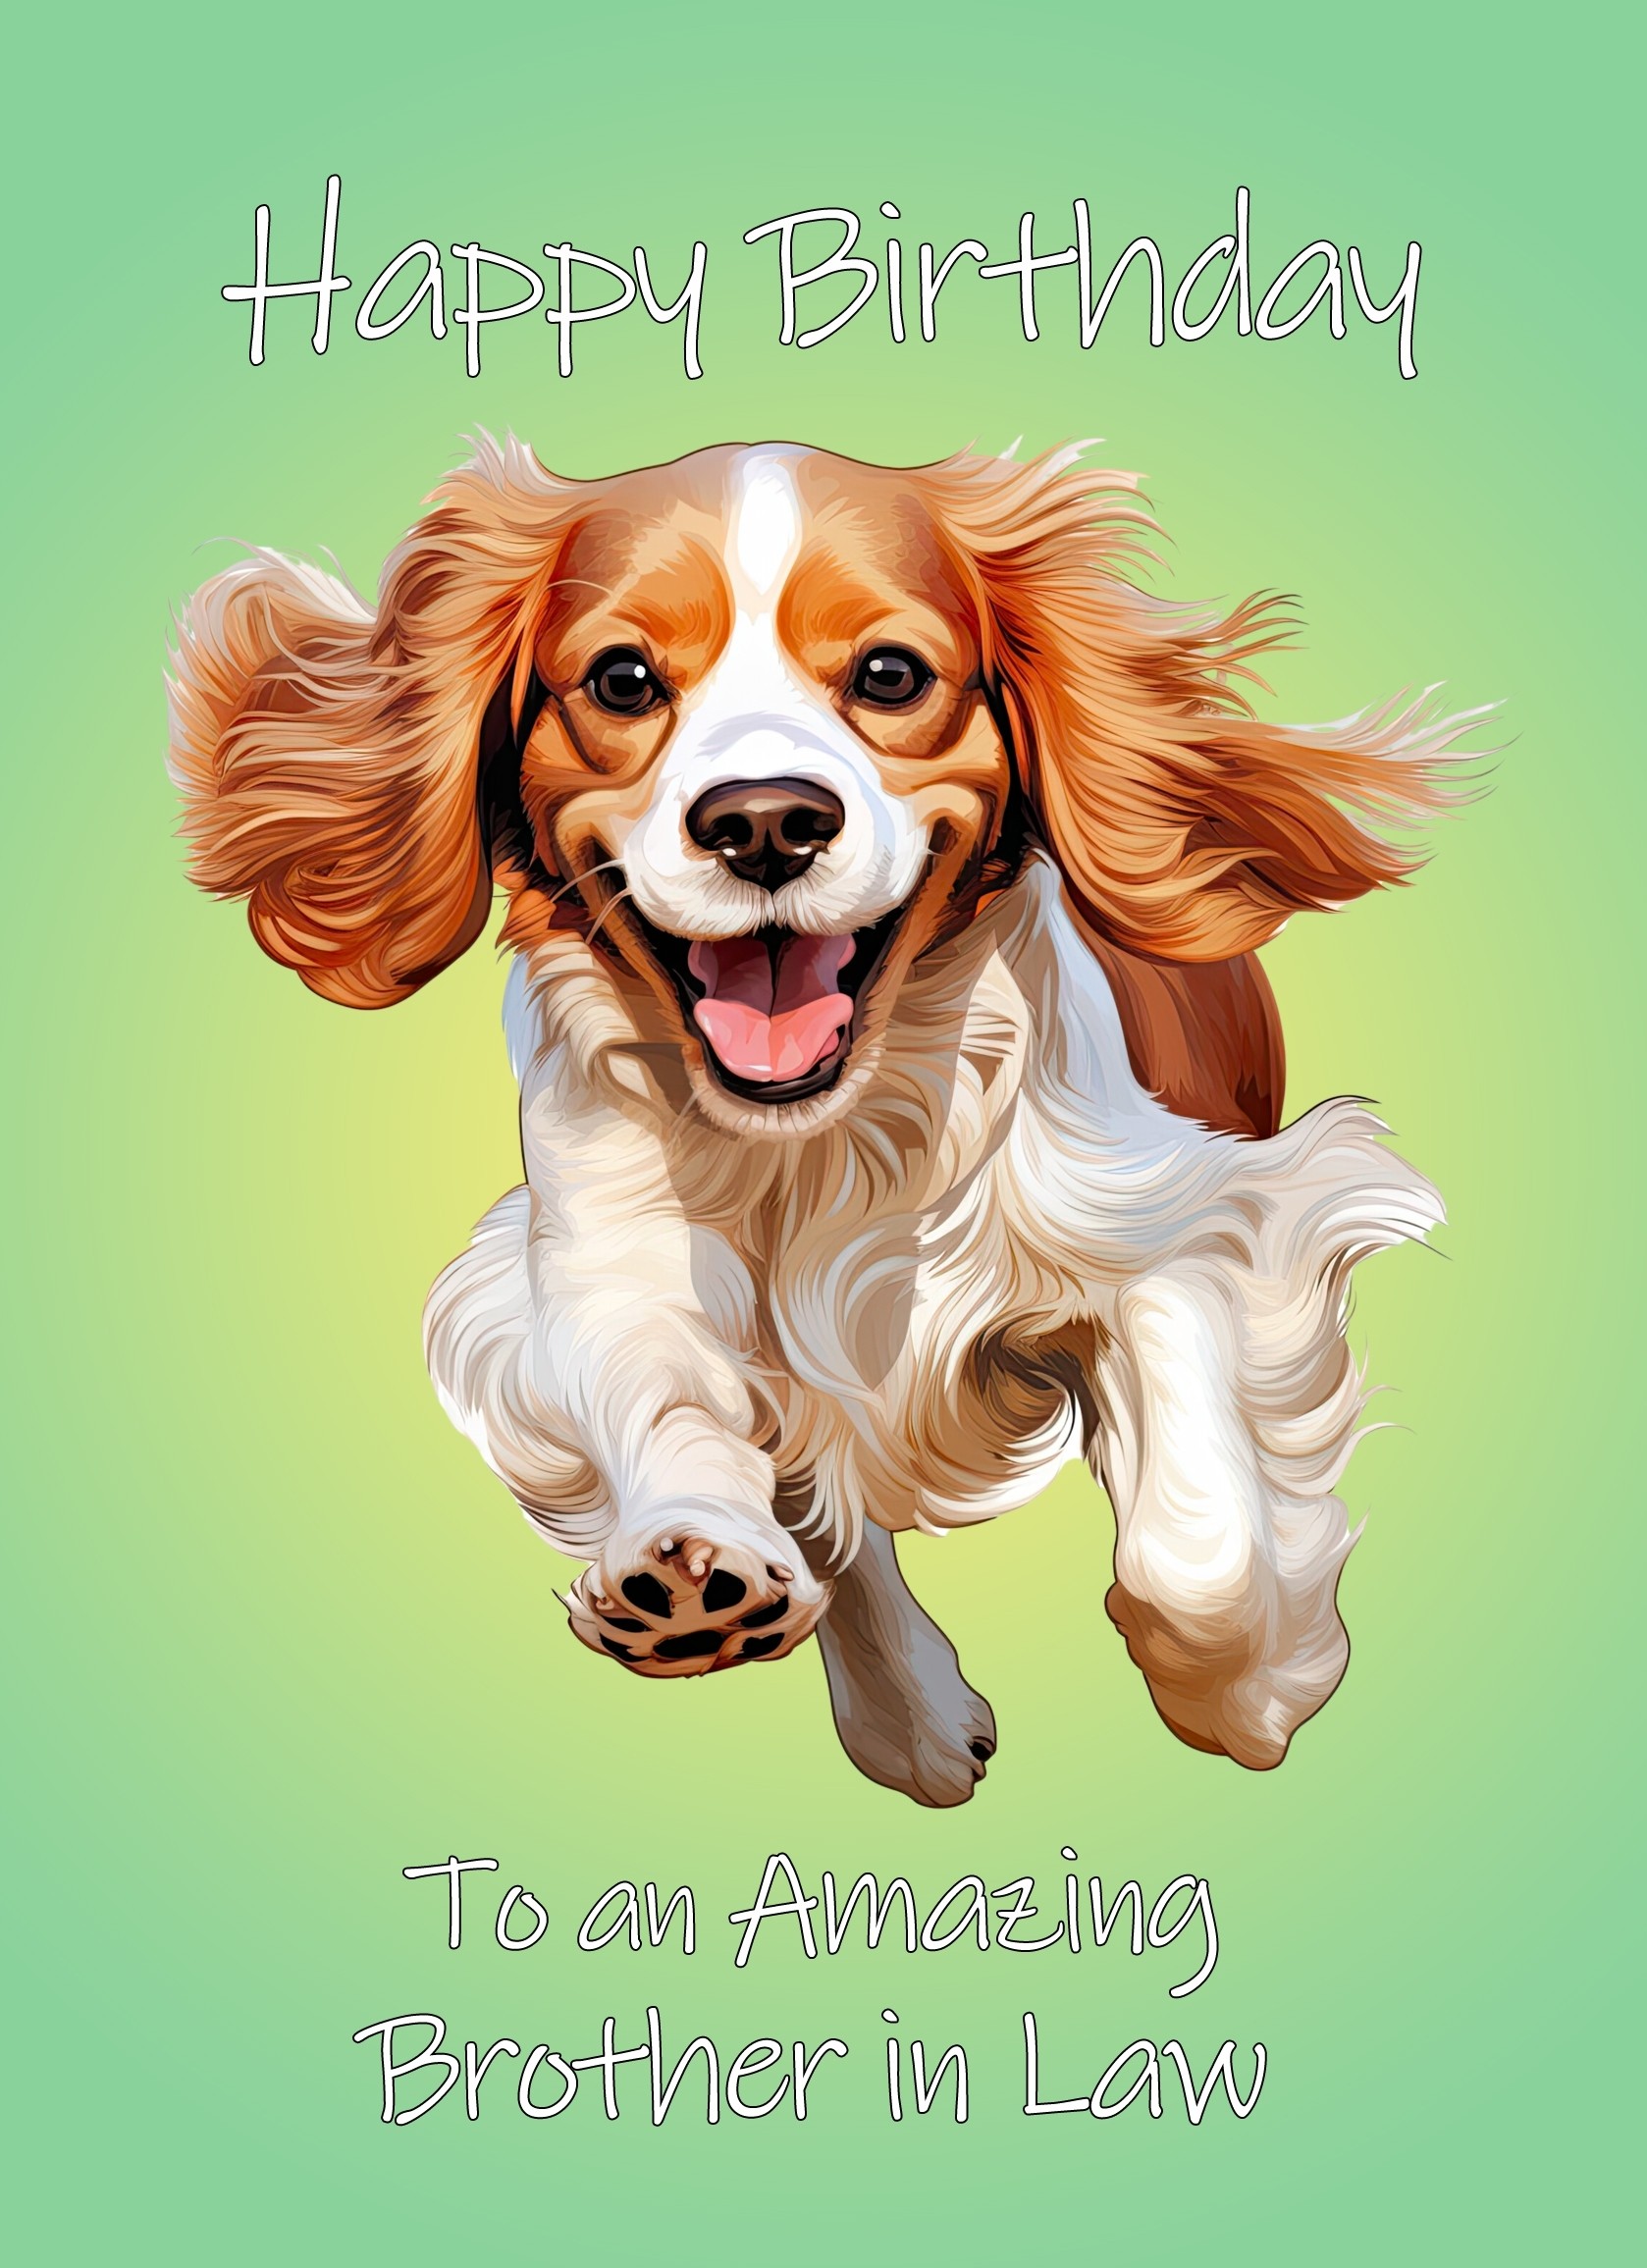 Cavalier King Charles Spaniel Dog Birthday Card For Brother in Law